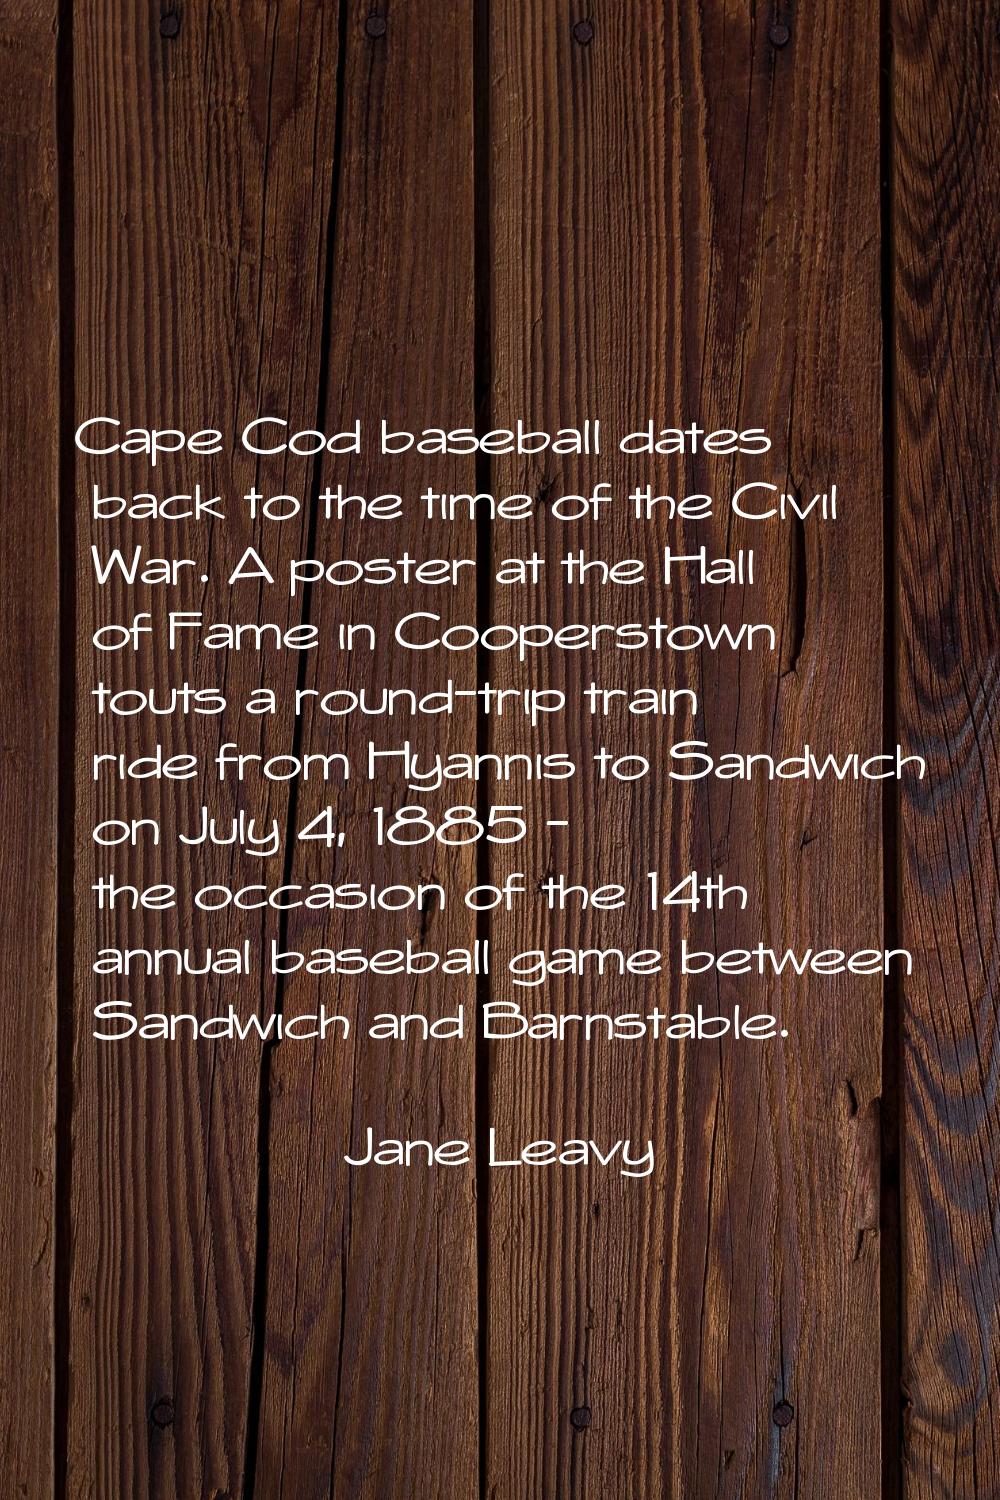 Cape Cod baseball dates back to the time of the Civil War. A poster at the Hall of Fame in Cooperst